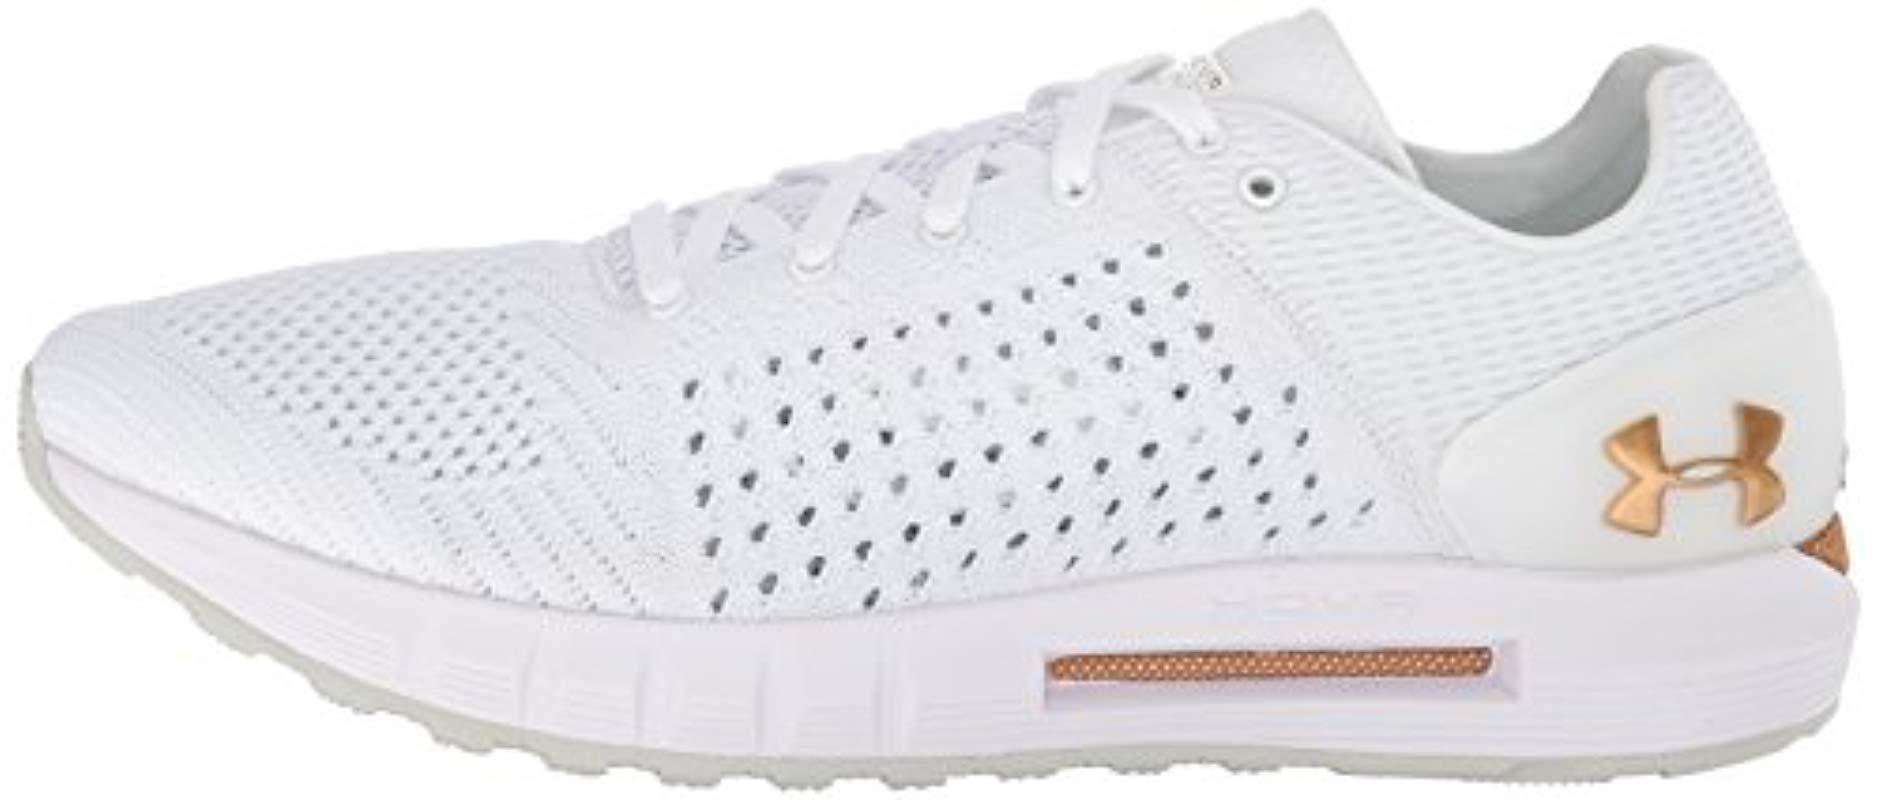 Under Armour Rubber Hovr Sonic Nc Running Shoe in White - Lyst